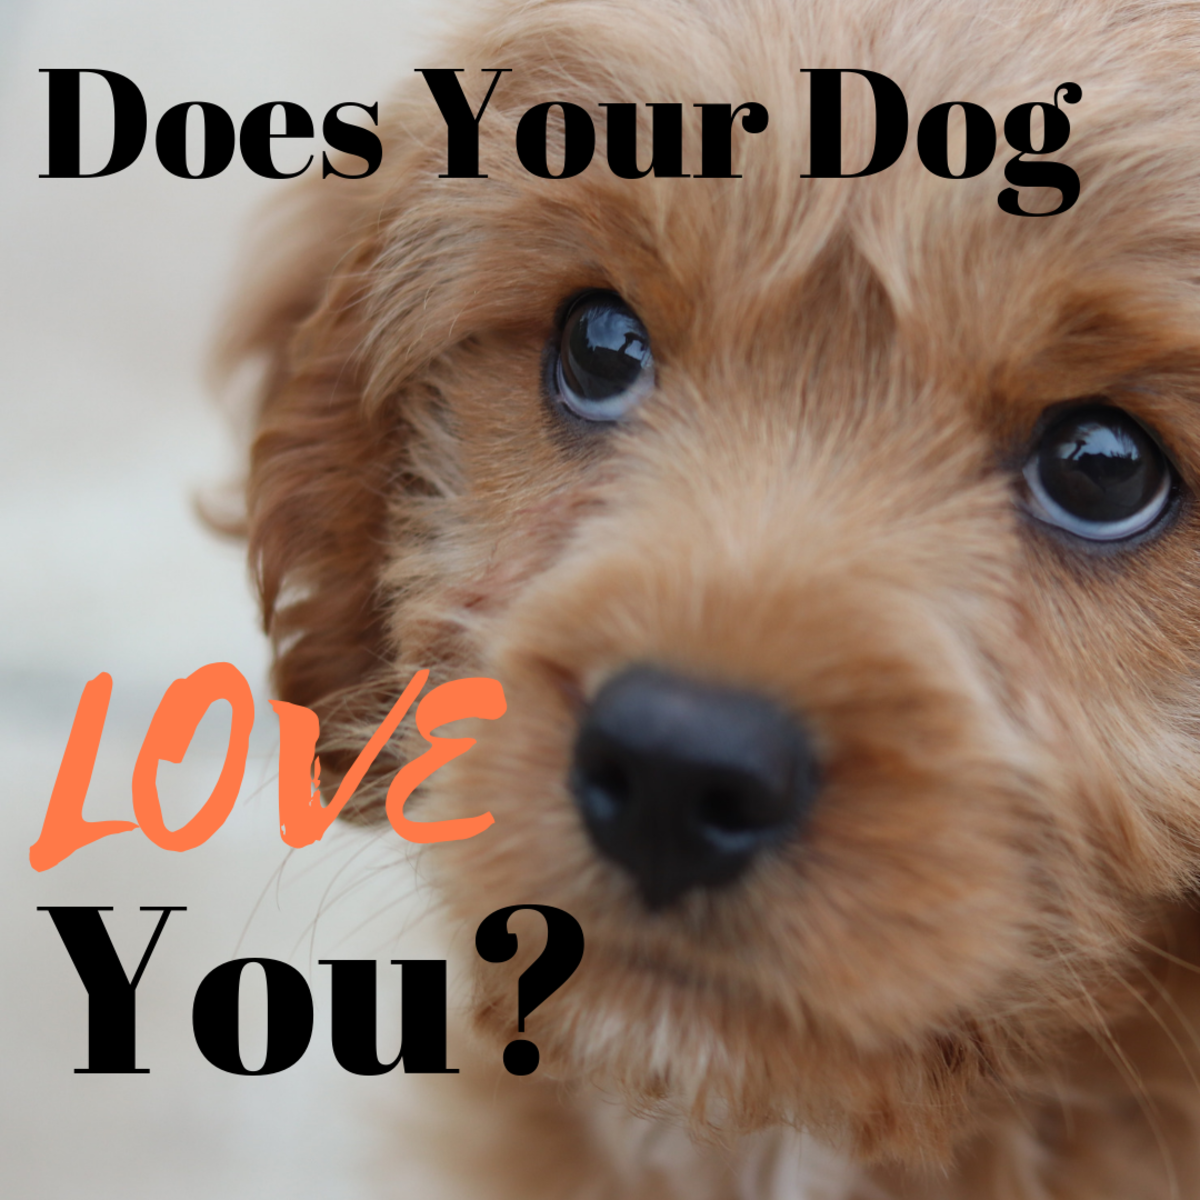 Signs Your Dog Loves You